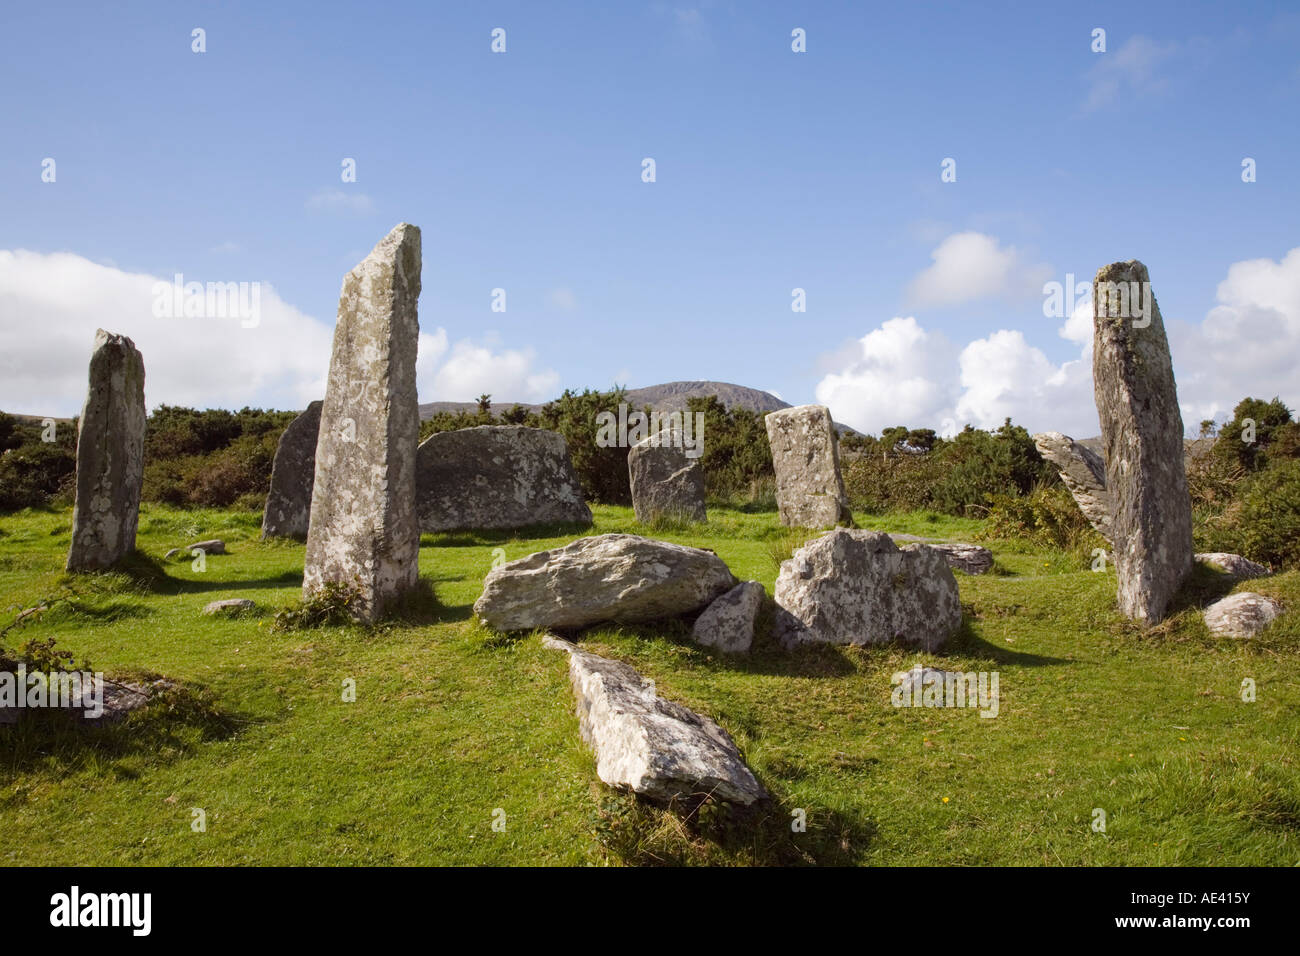 Derrintaggart West stone circle, megalithic site on Beara Peninsula, Castletown, County Cork, Munster, Republic of Ireland Stock Photo